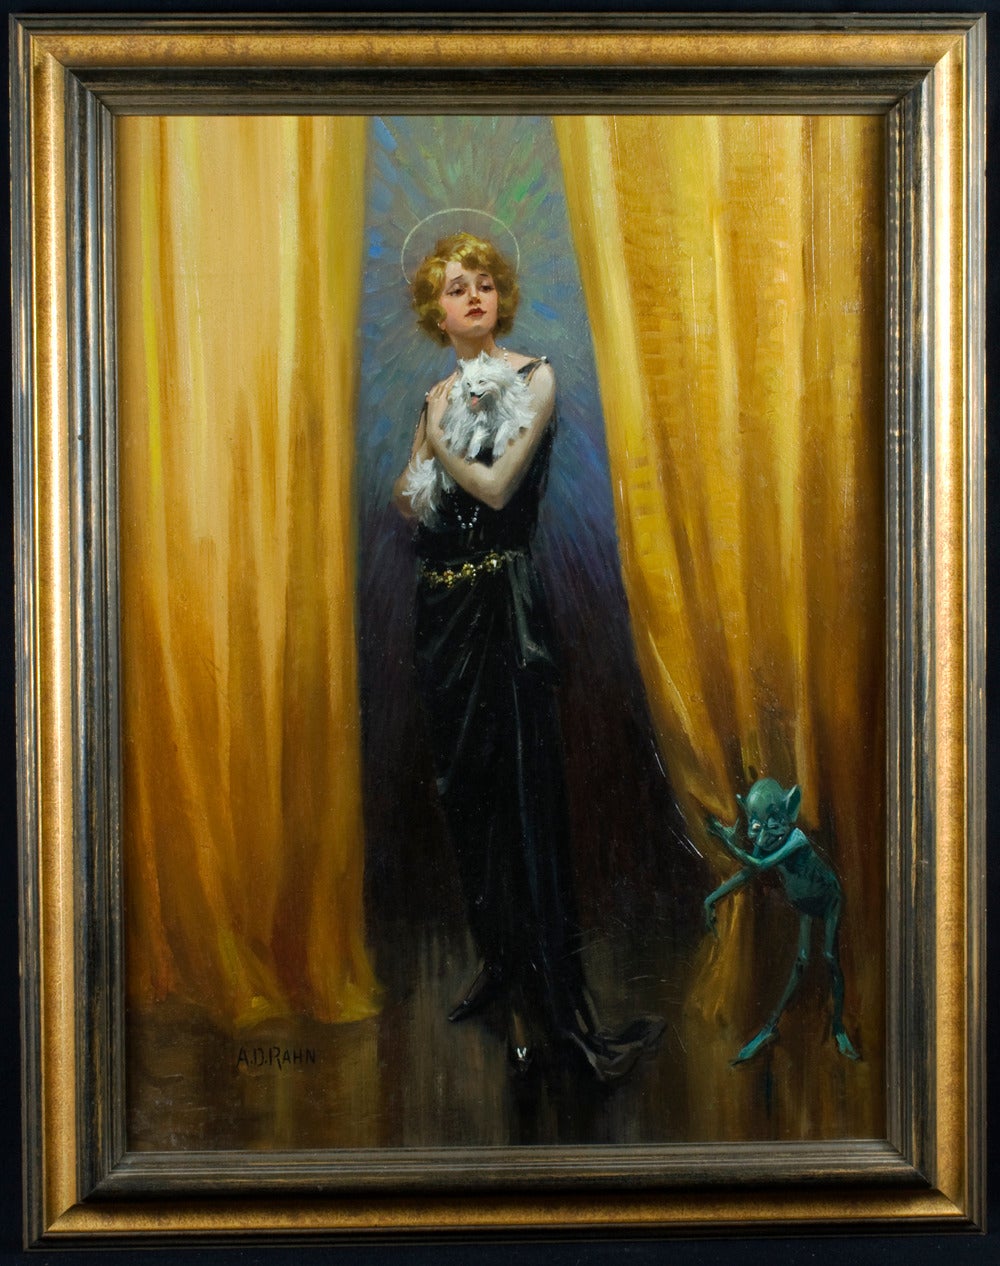 Making her Appearance - Painting by A.D. Rahn